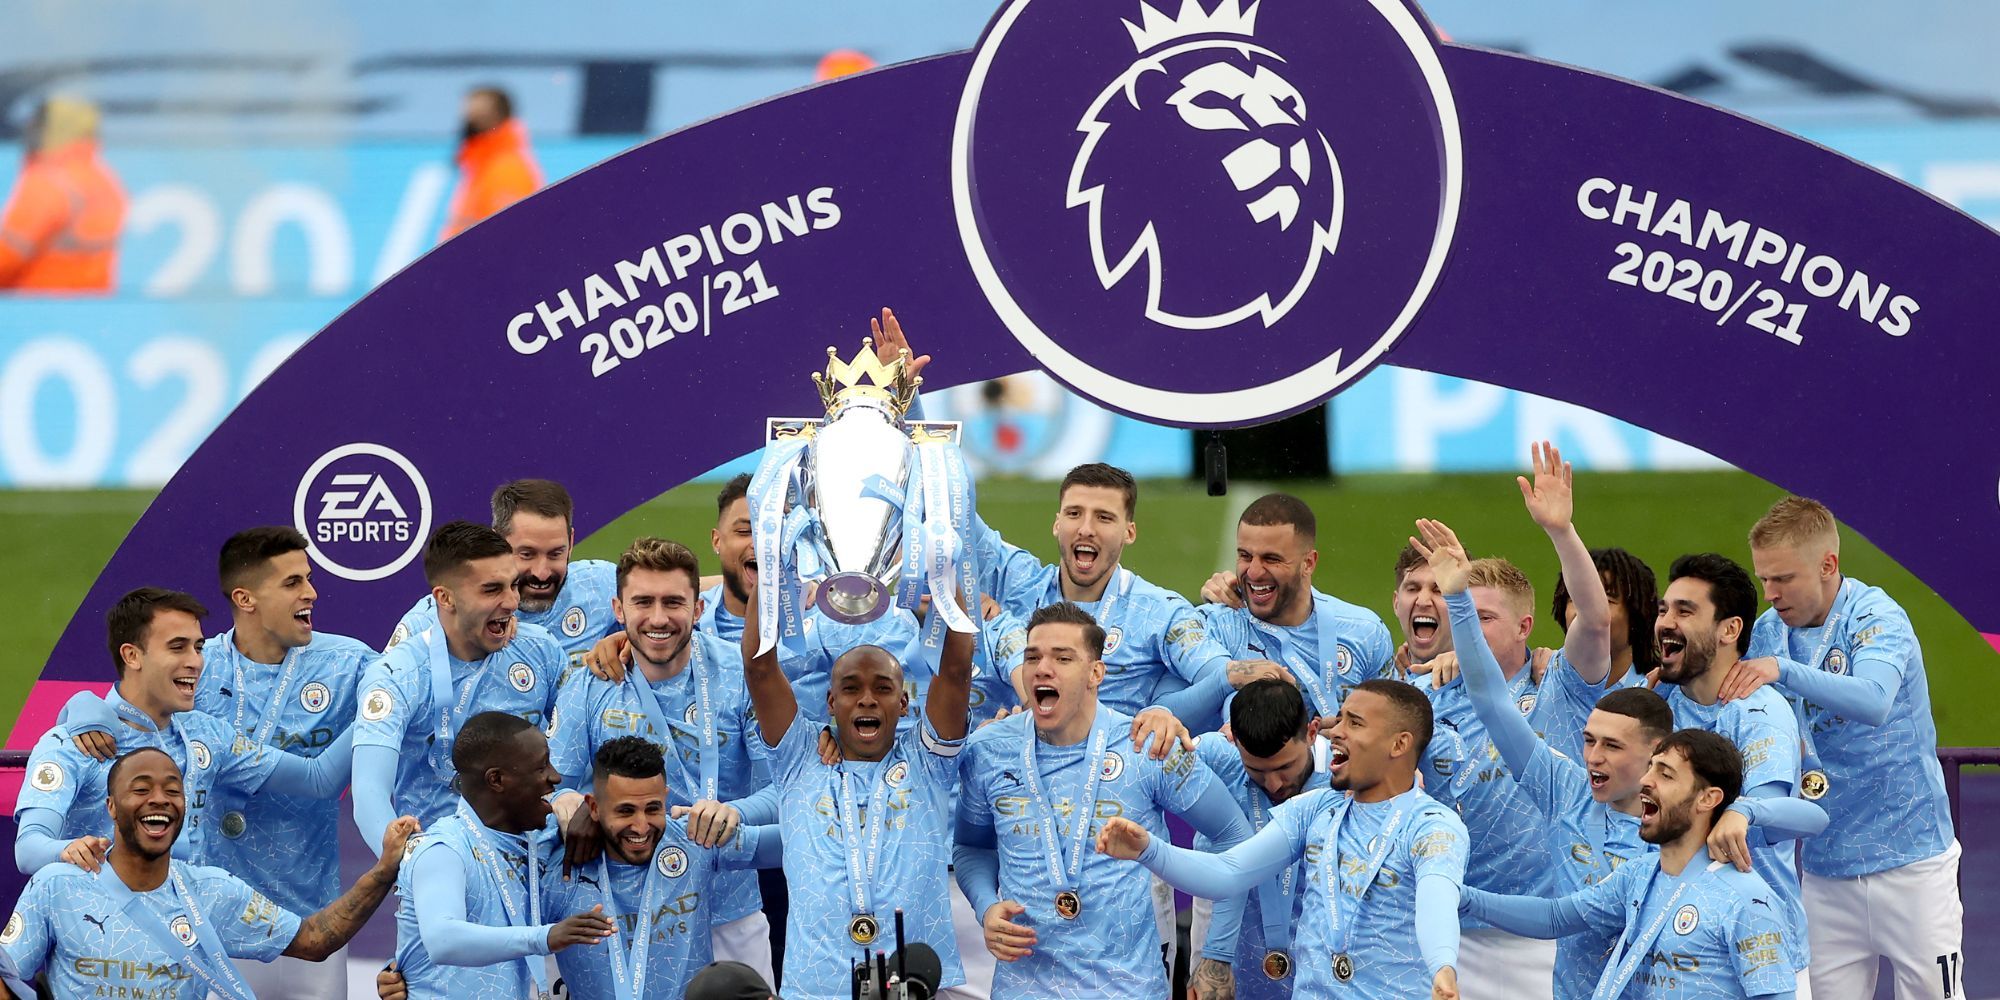 Manchester City have dominated English football for almost a decade